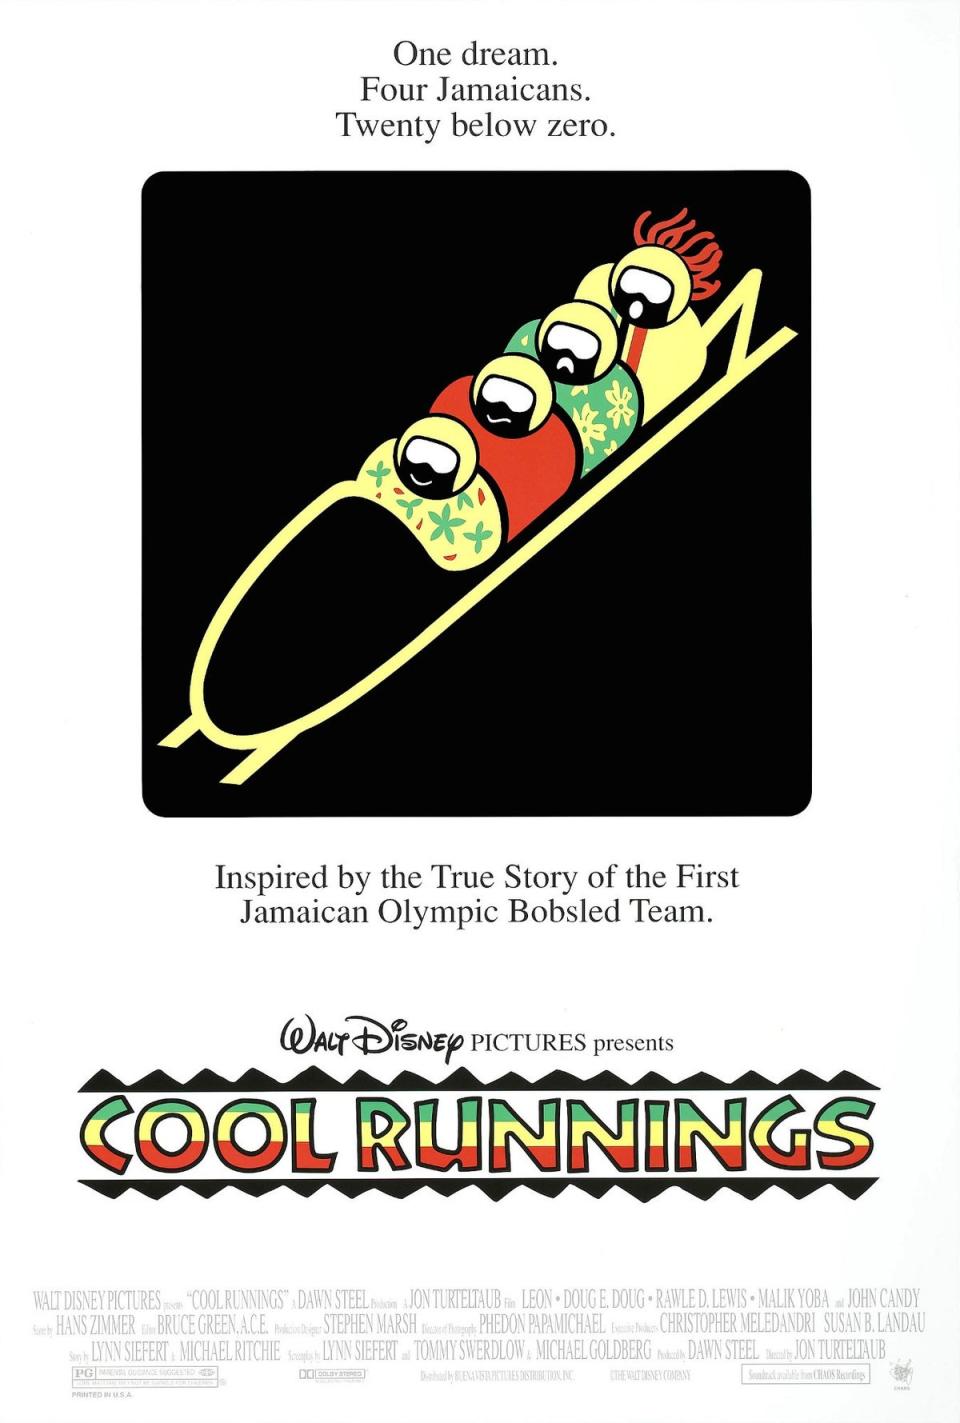 The surprisingly arty original poster for the cinematic release of ‘Cool Runnings’ (Disney)